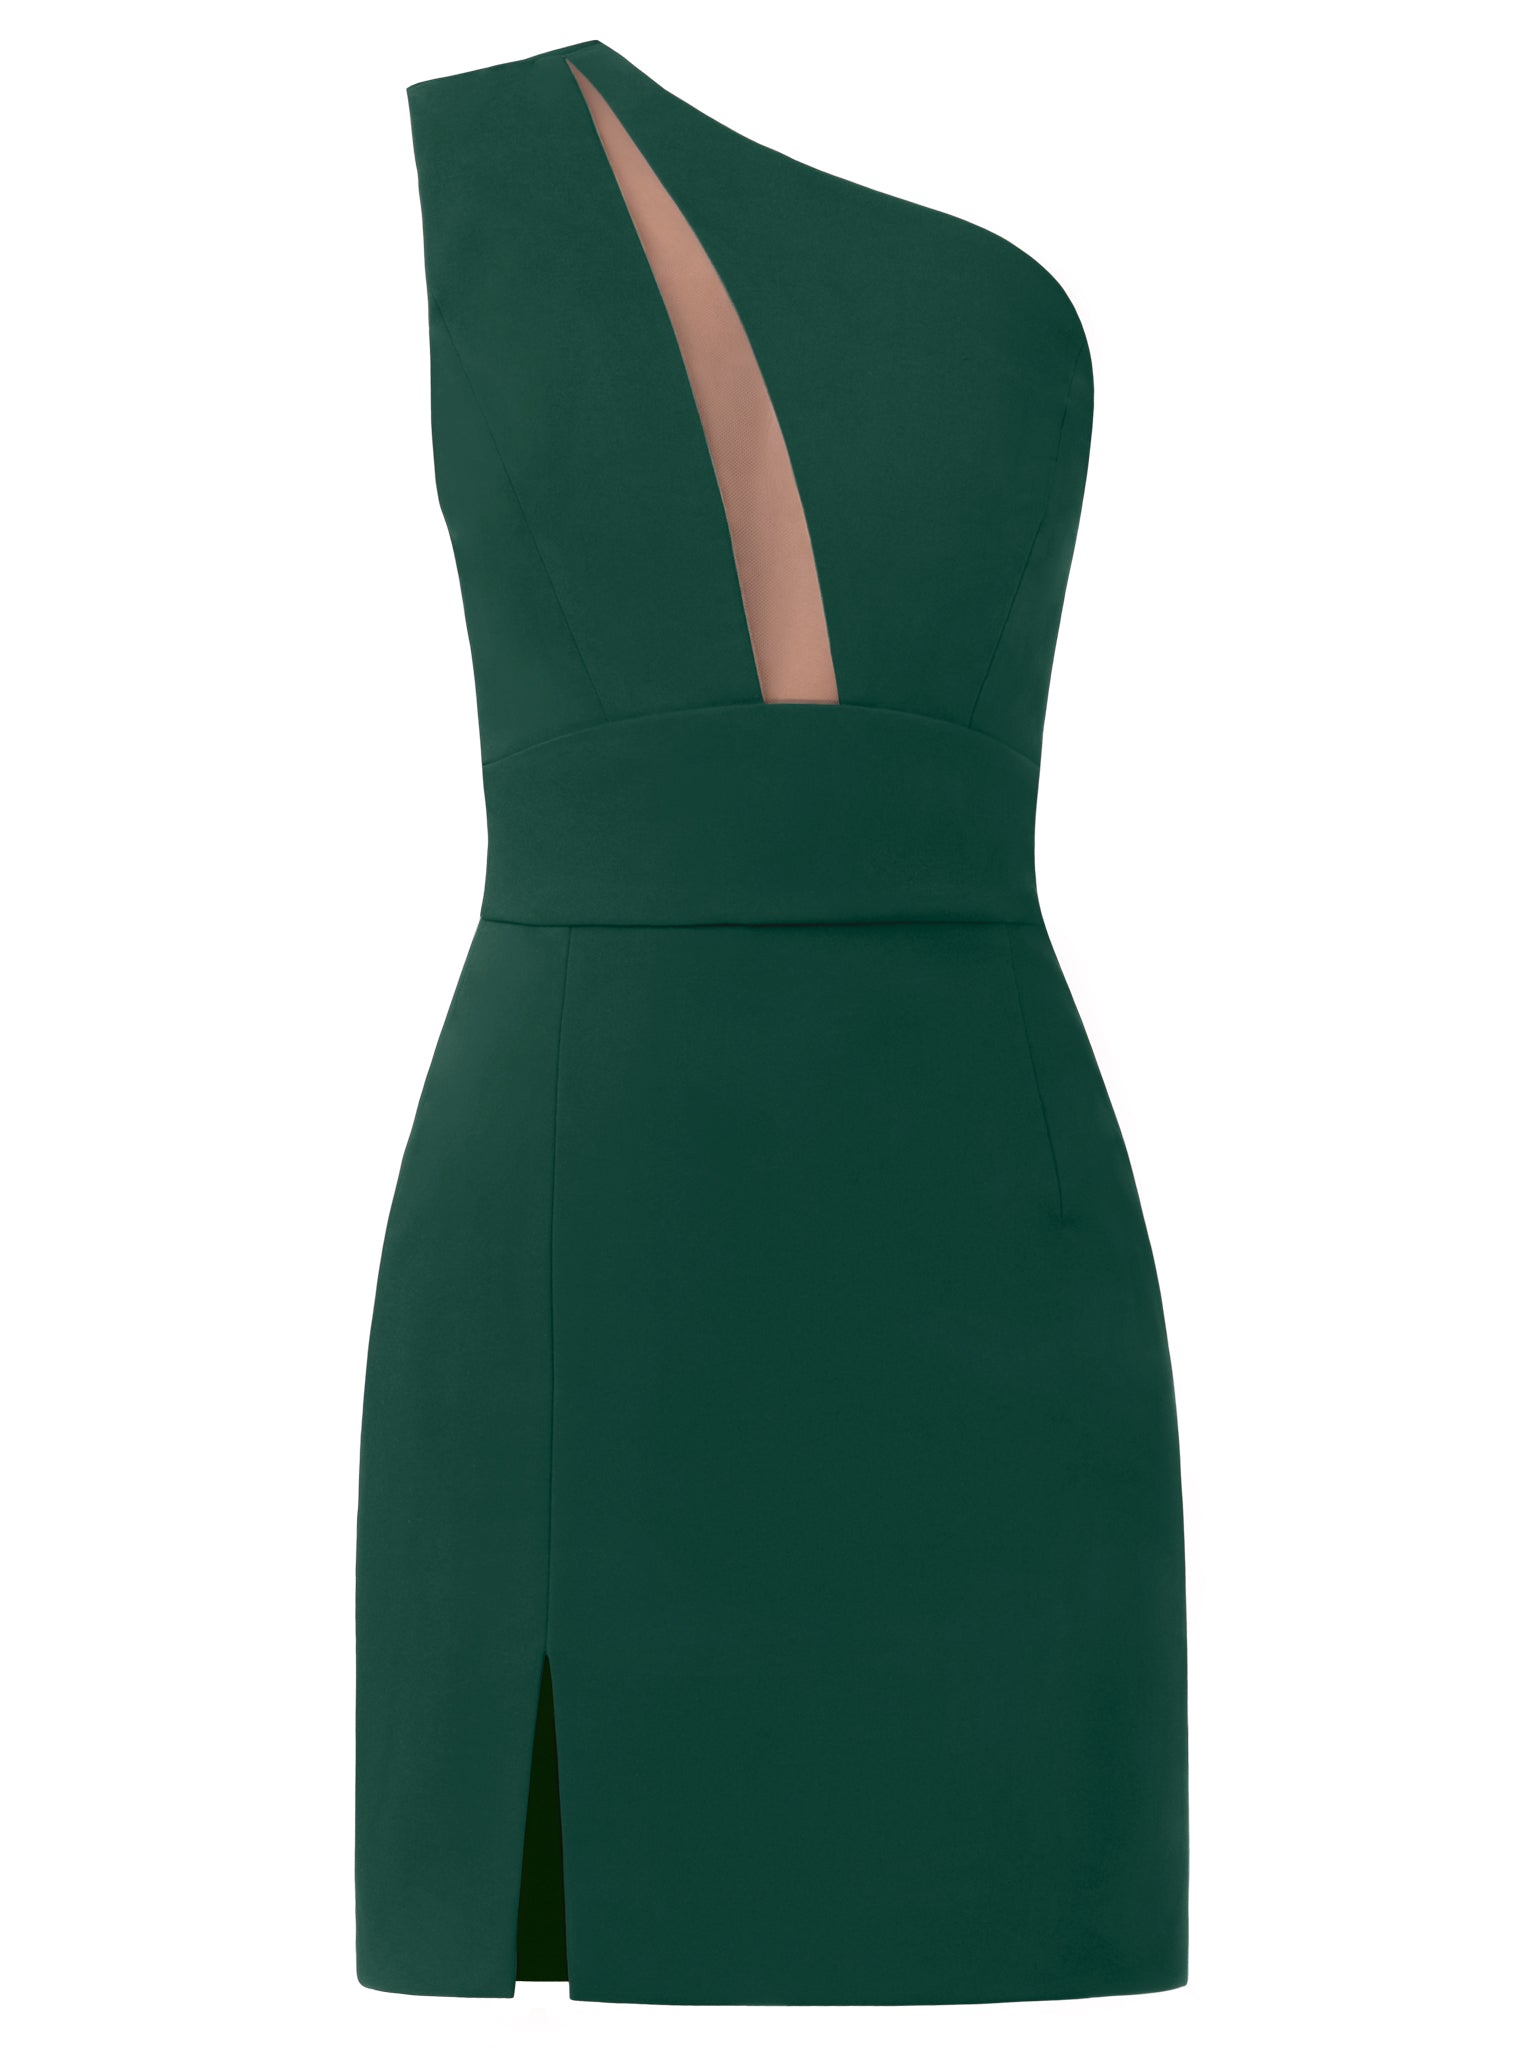 Tia Dorraine Love Weapon One-Shoulder Mini Dress - Dark Green This mini dress showcases the sophisticated style and modern allure of Tia Dorraine. Its confidently feminine figure-hugging silhouette pairs with an asymmetrical neckline and cut-out bodice de